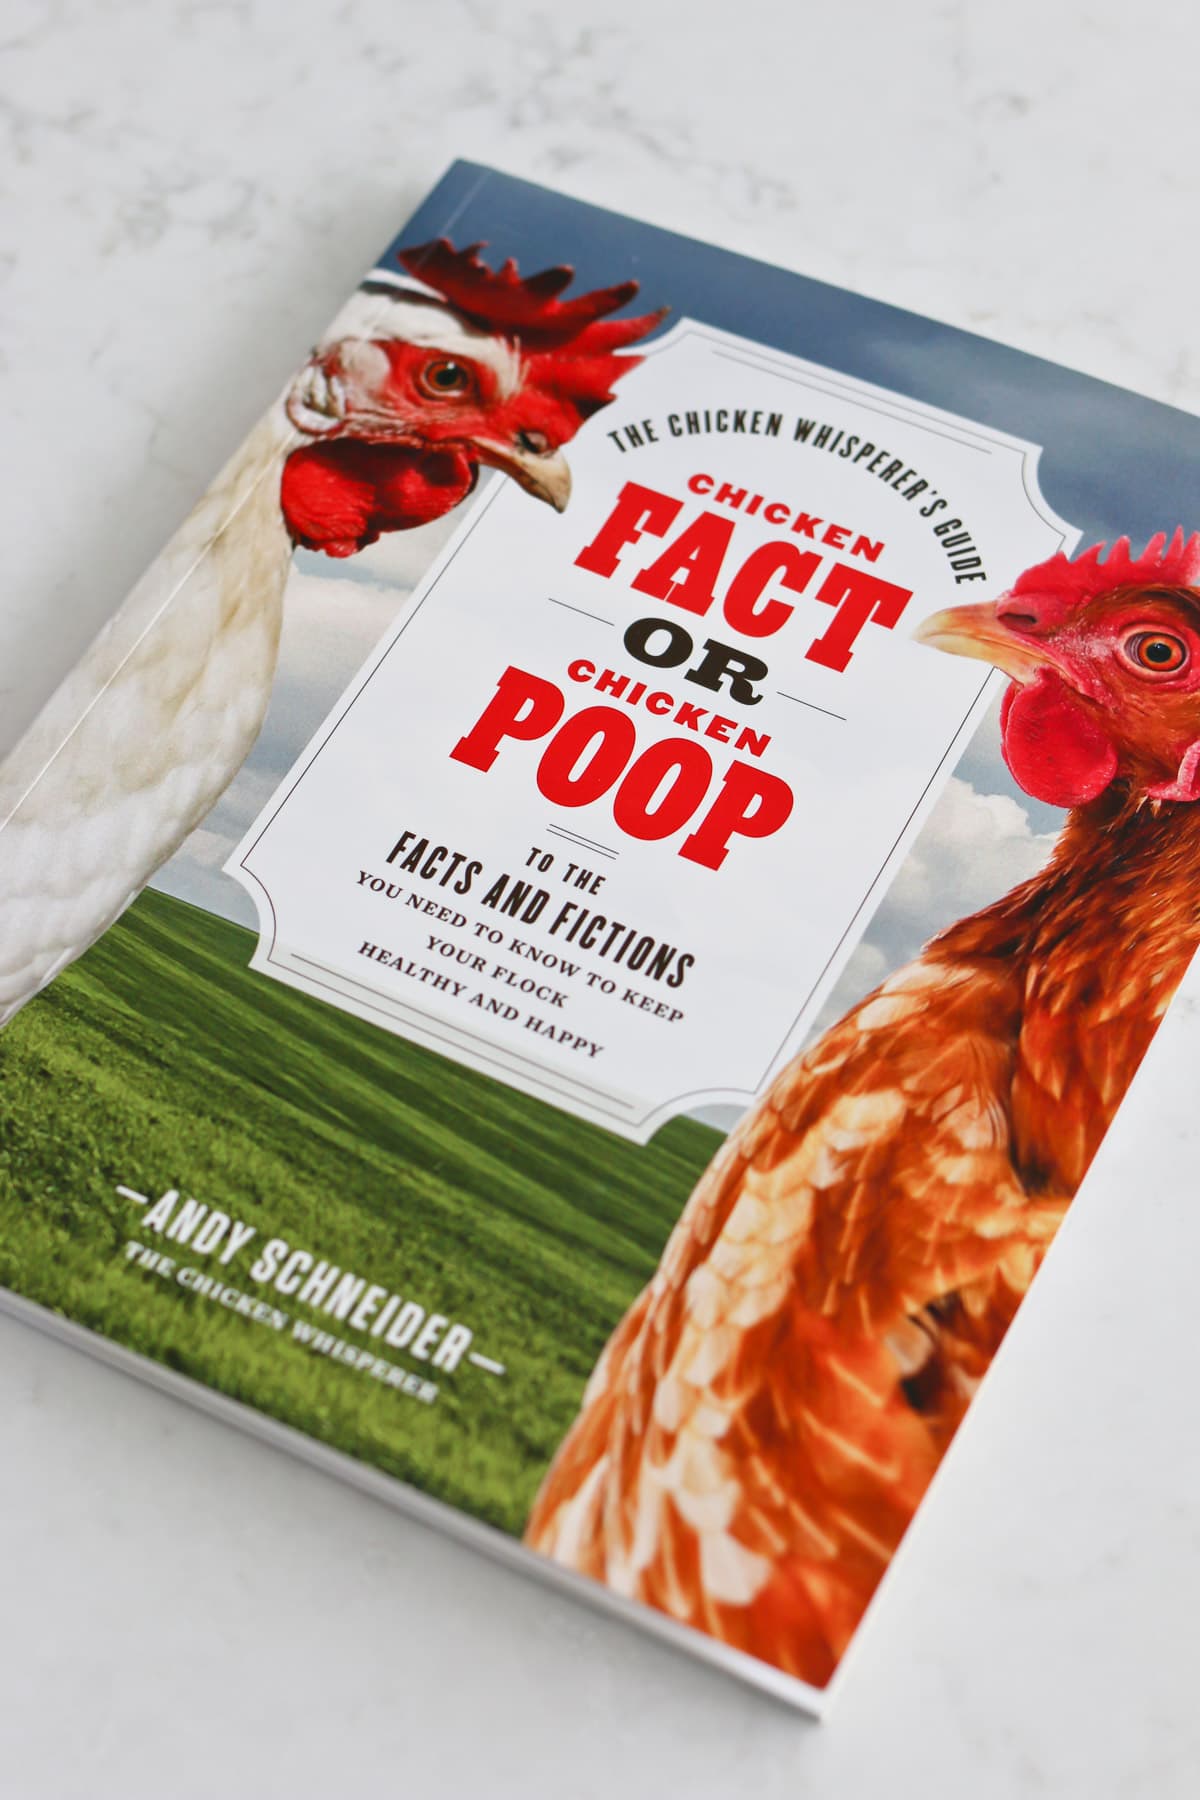 Chicken fact or chicken poop book review